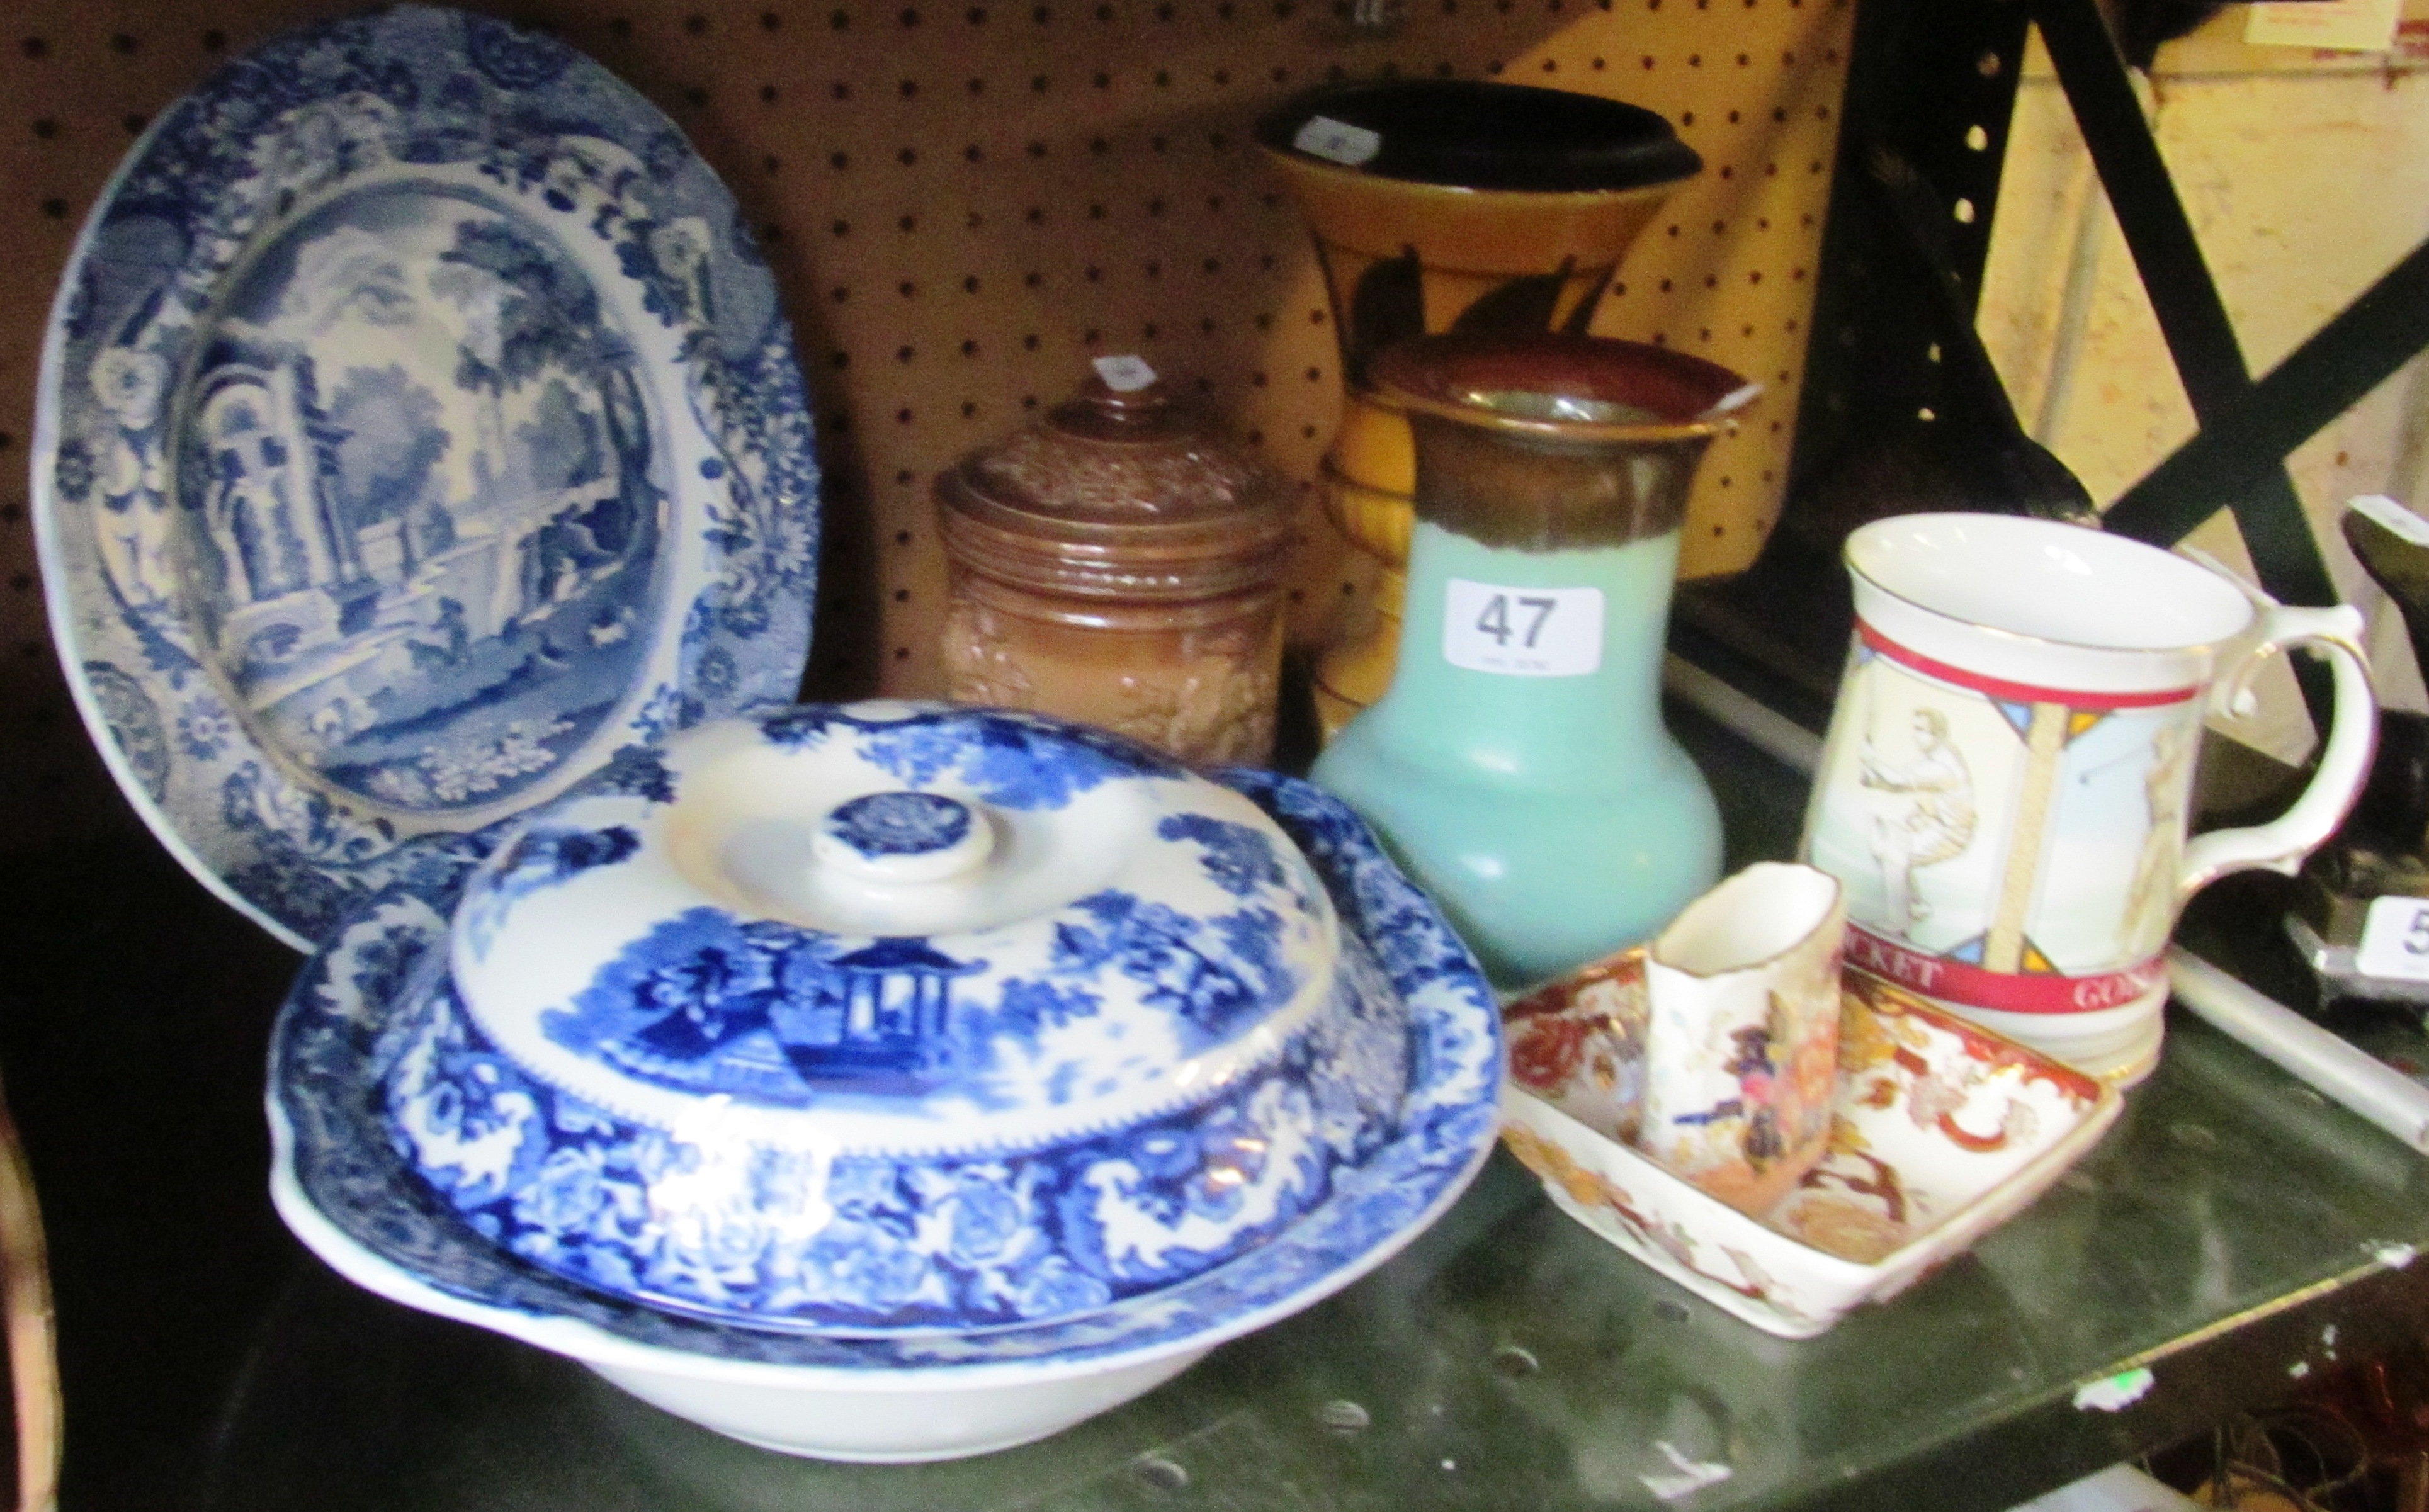 A Copeland Spode Italian plate, Honiton pottery vase and other pottery